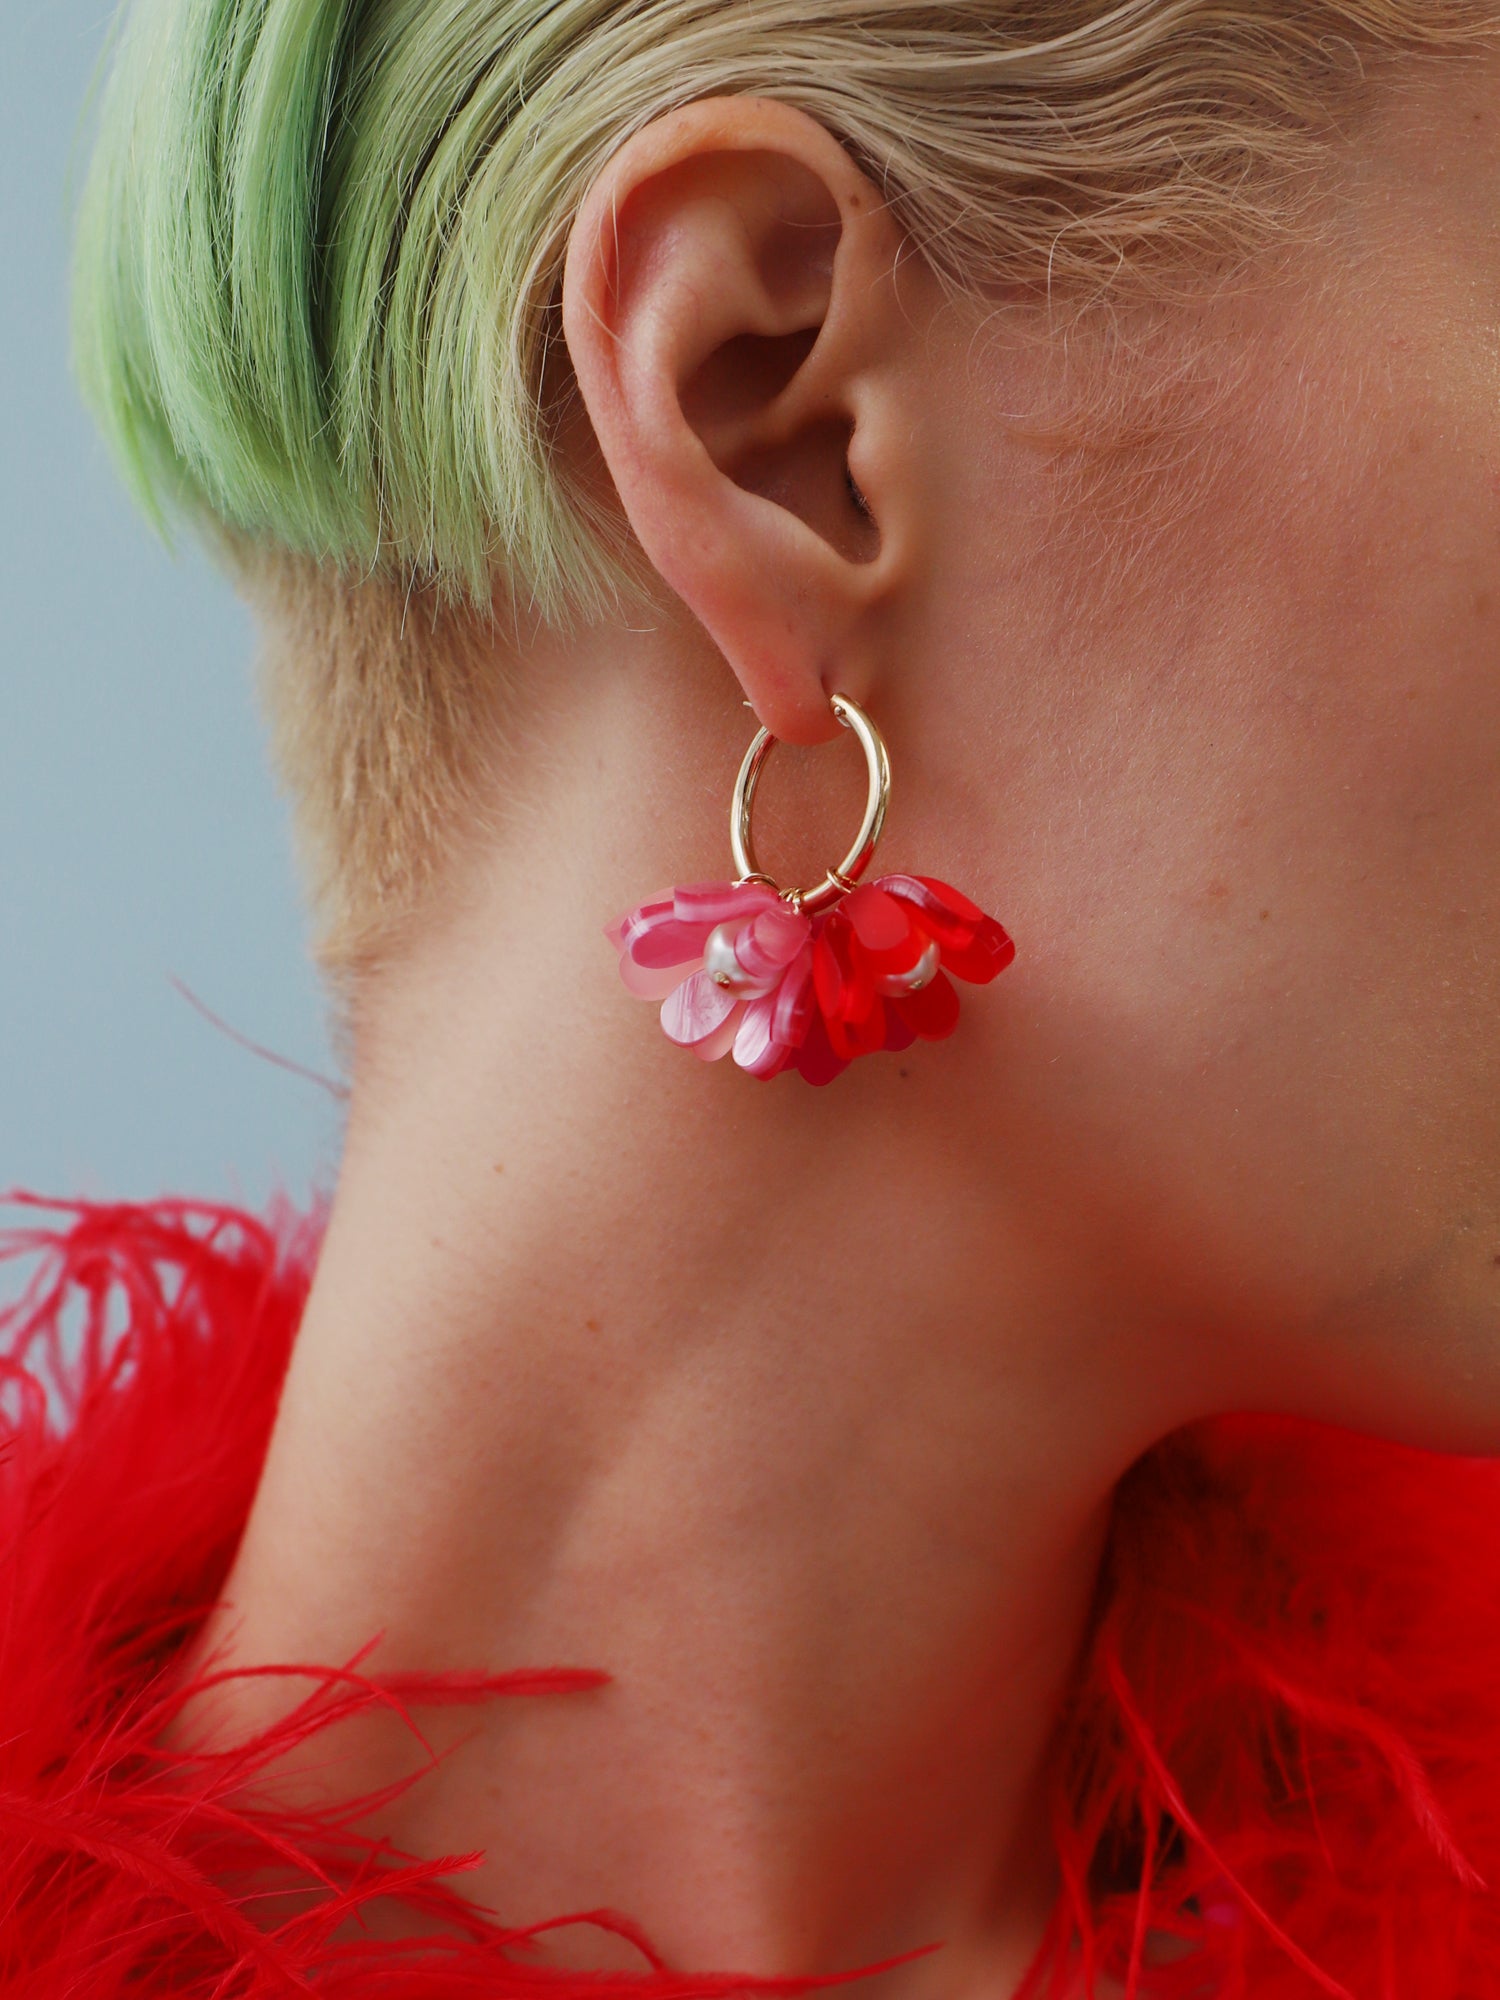 Statement tulip meadow hoop earrings with 8 interchangeable flowers in red & pink shades. Made from heat-formed acrylic with high quality glass pearls and 14k gold-filled findings. Handmade in the UK by Wolf & Moon.